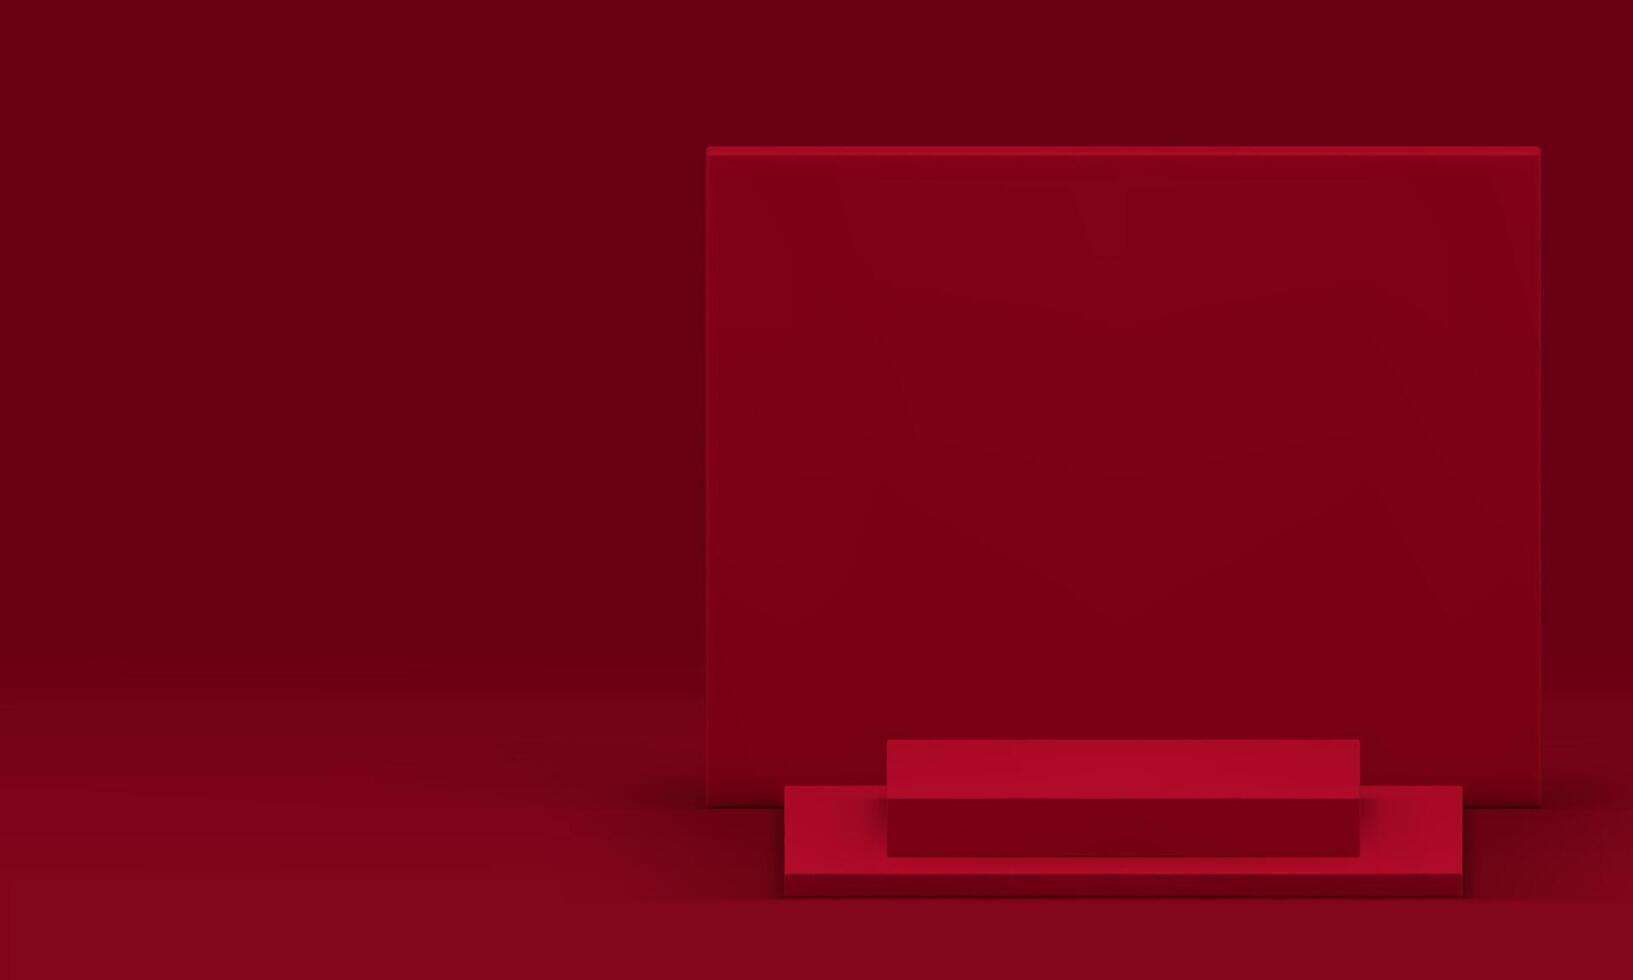 Red geometric 3d podium step pedestal with rectangle wall background realistic vector